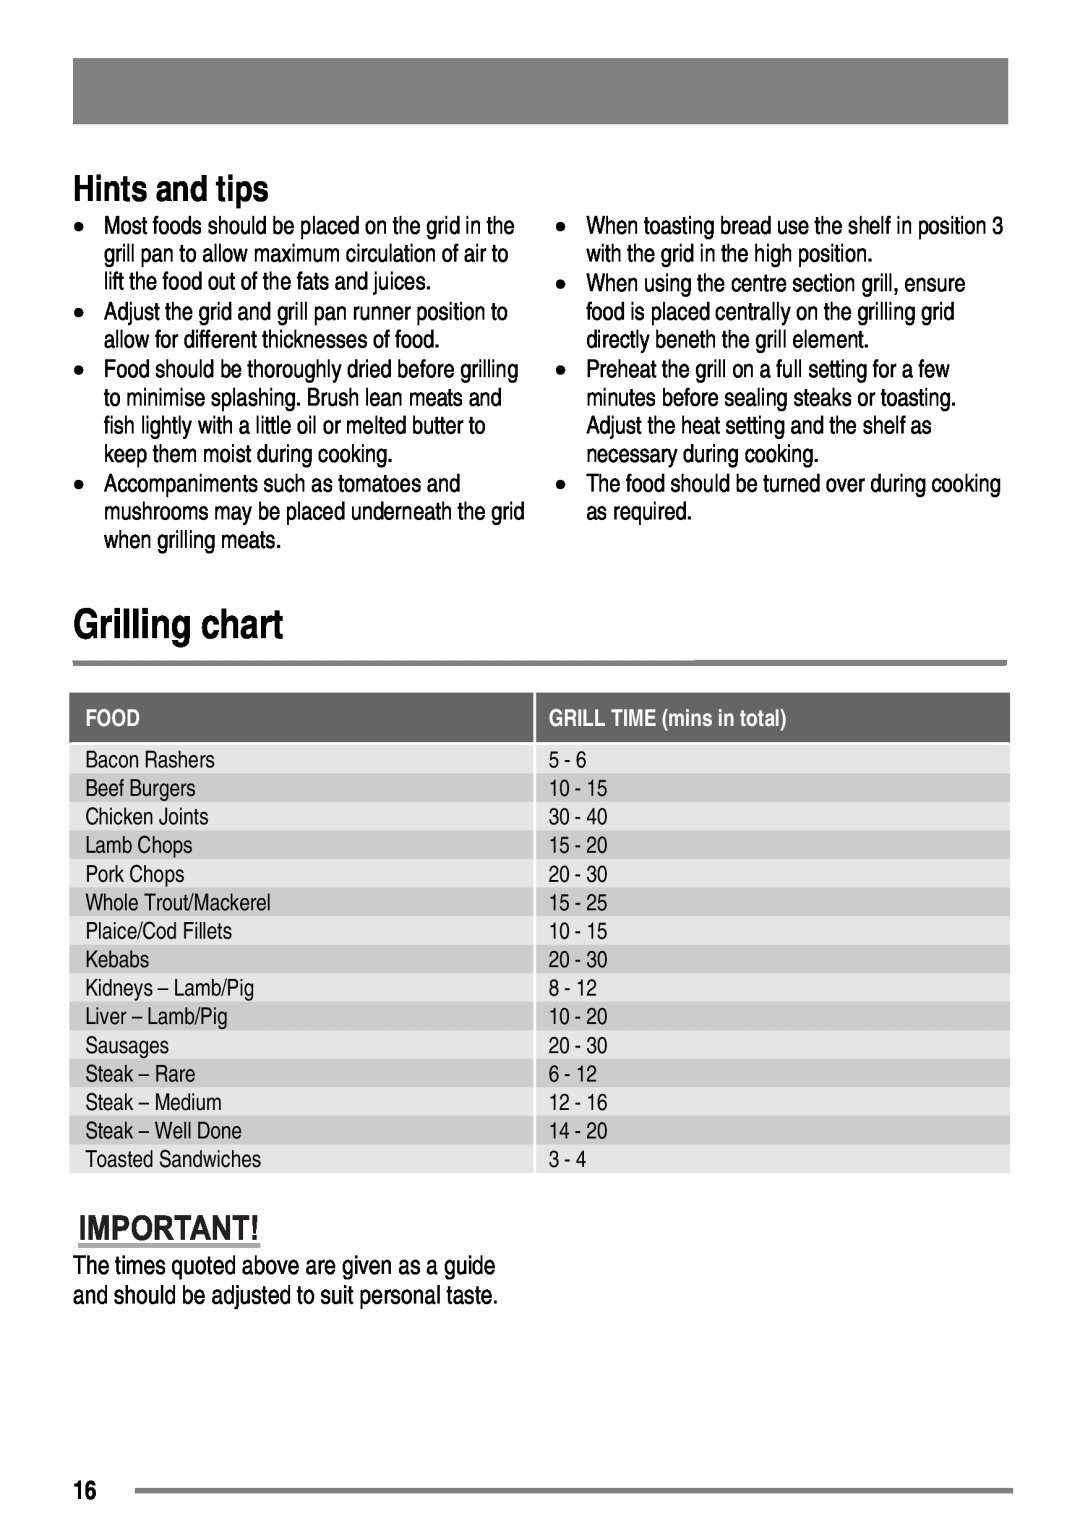 Tricity Bendix SE558 user manual Grilling chart, Hints and tips, Food, GRILL TIME mins in total 